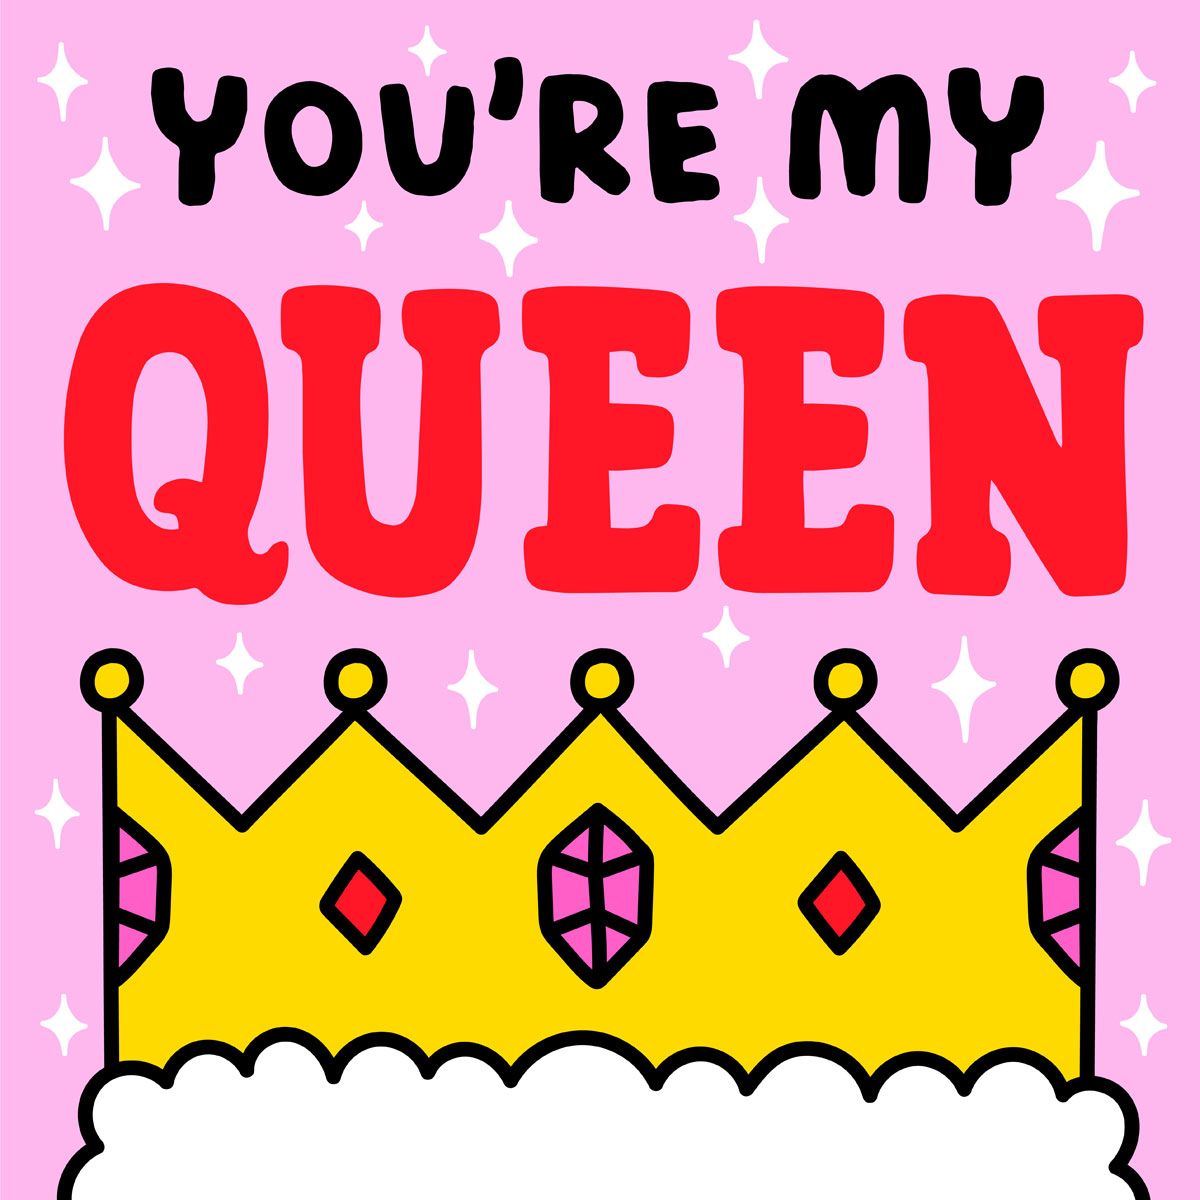 You are my queen